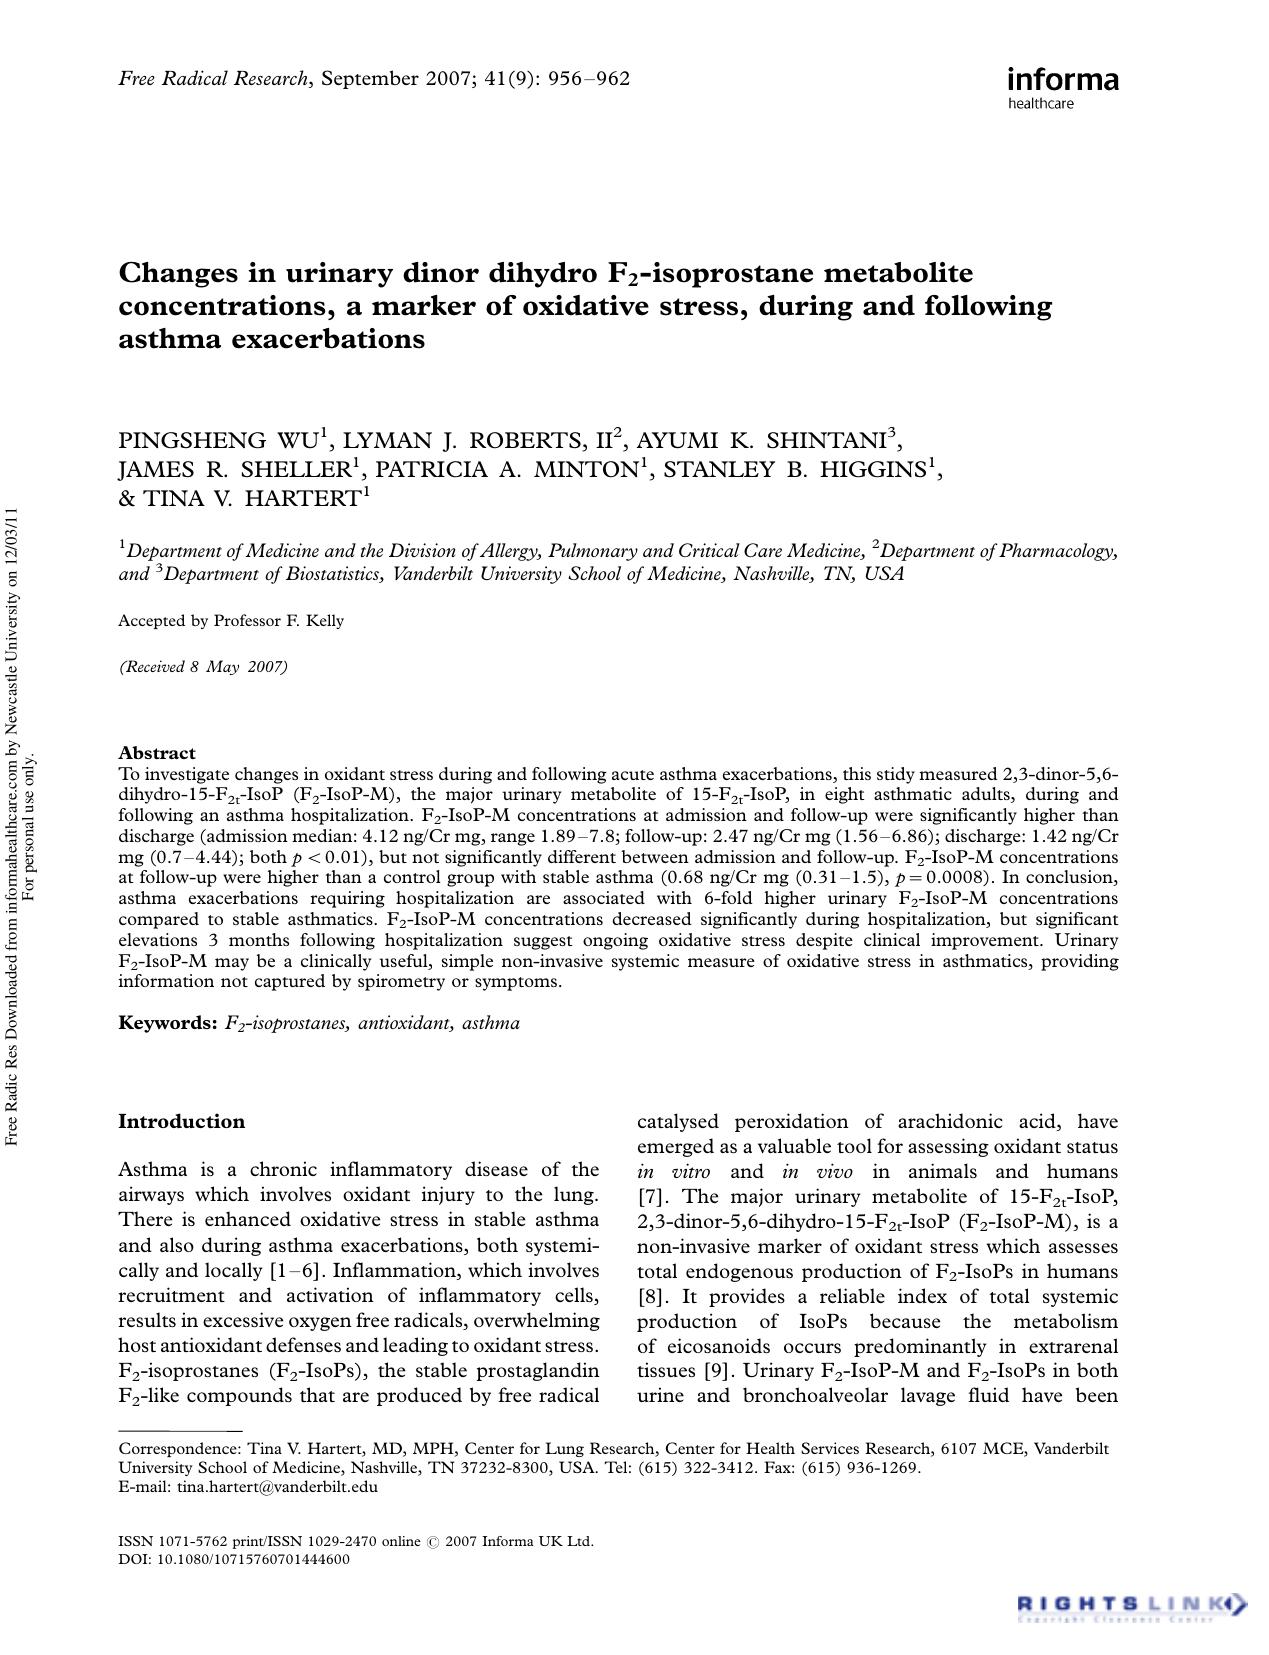 Changes in urinary dinor dihydro F2-isoprostane metabolite concentrations, a marker of oxidative stress, during and following asthma exacerbations by unknow